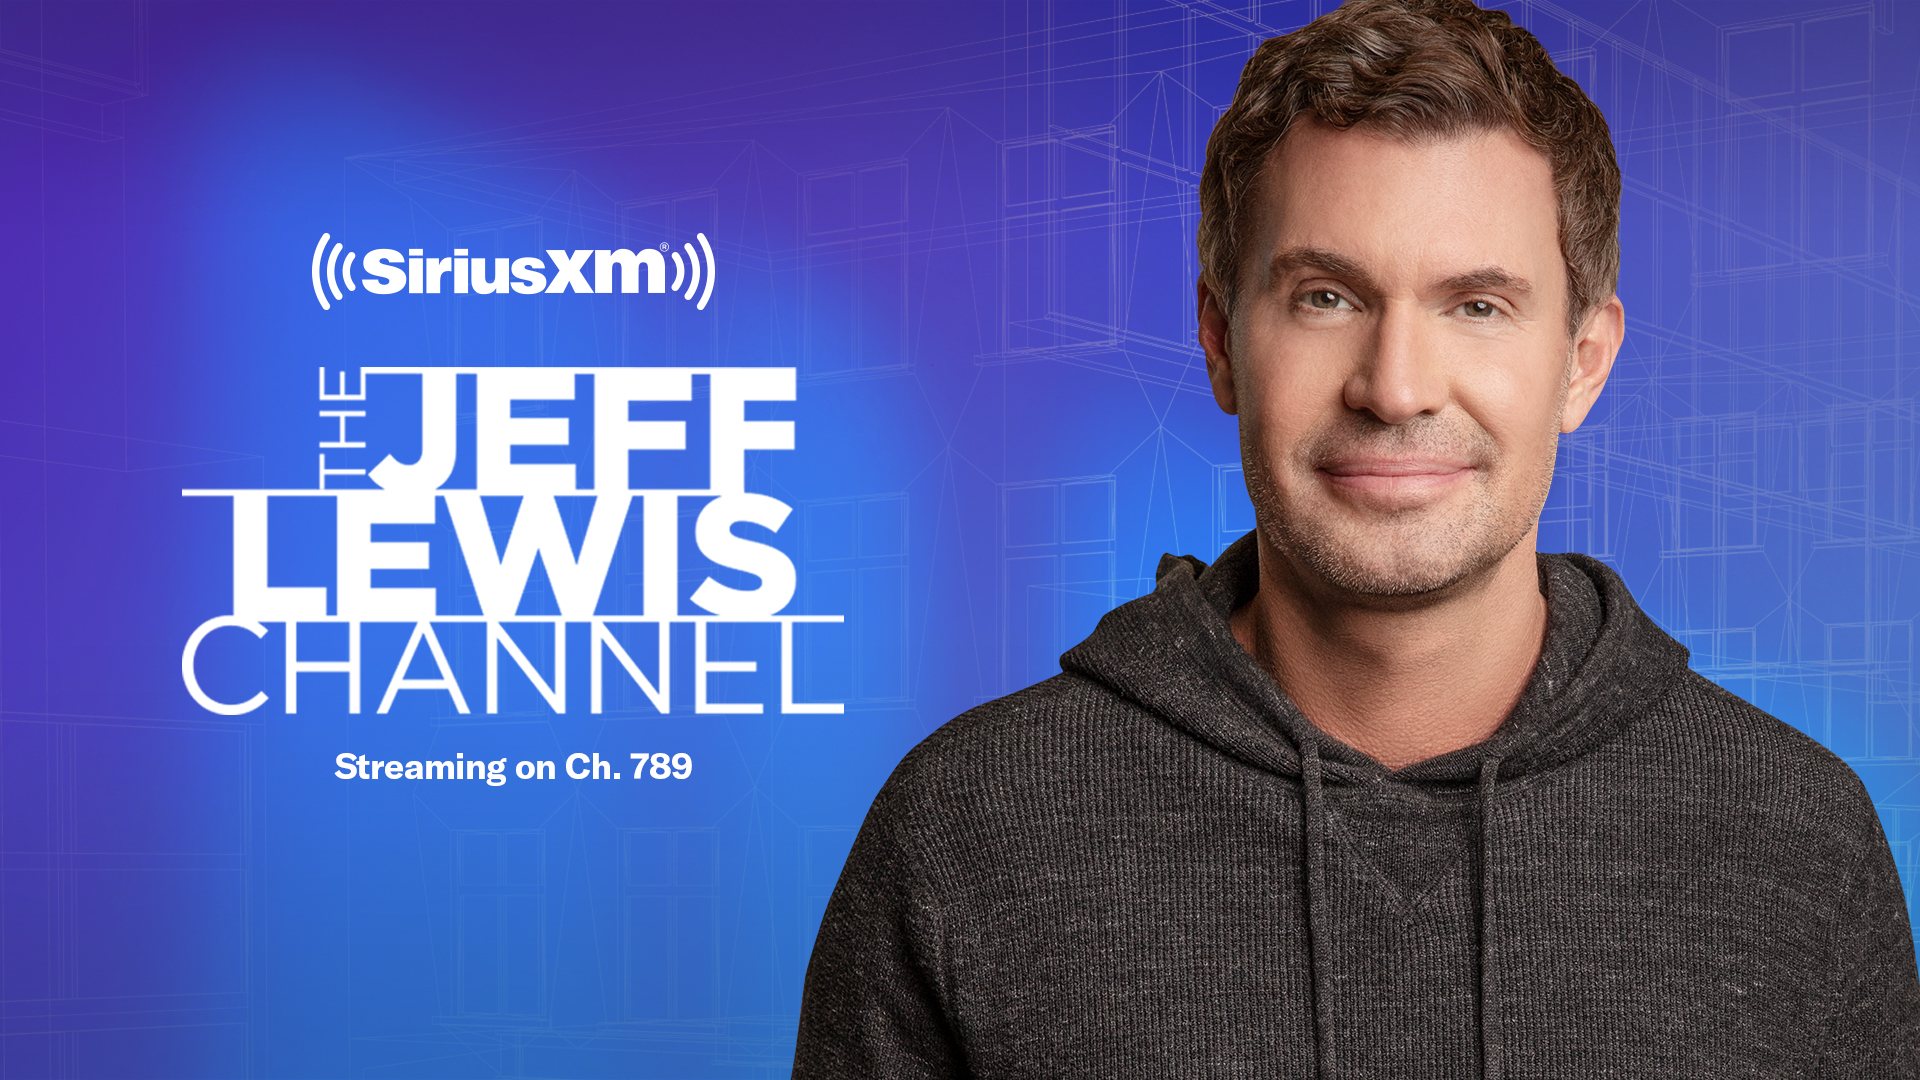 The Jeff Lewis Channel streaming on Ch. 789 on SiriusXM